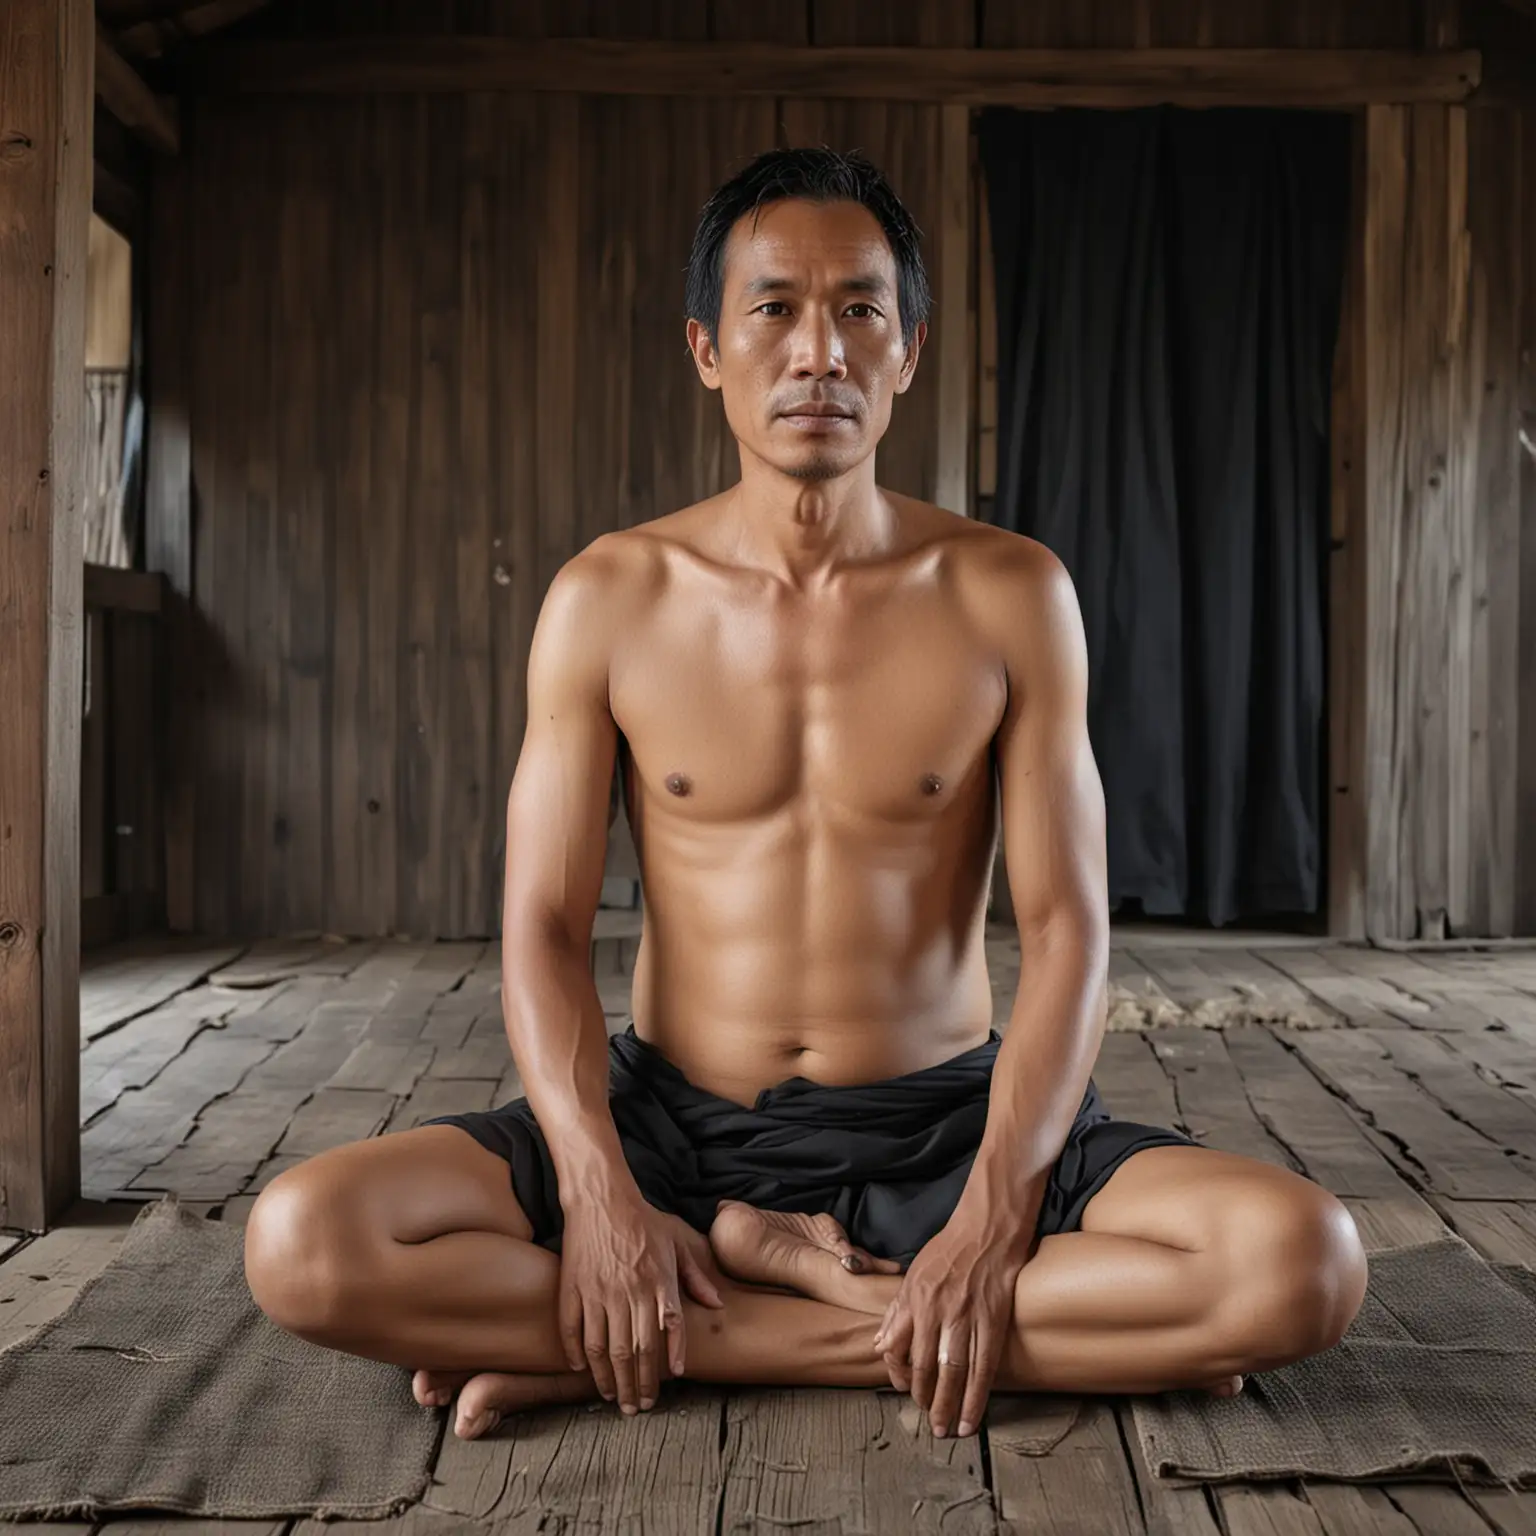 45 year old Indonesian man bare chested sitting cross-legged wearing a long black cloth without a pattern, white skin, in a traditional wooden house